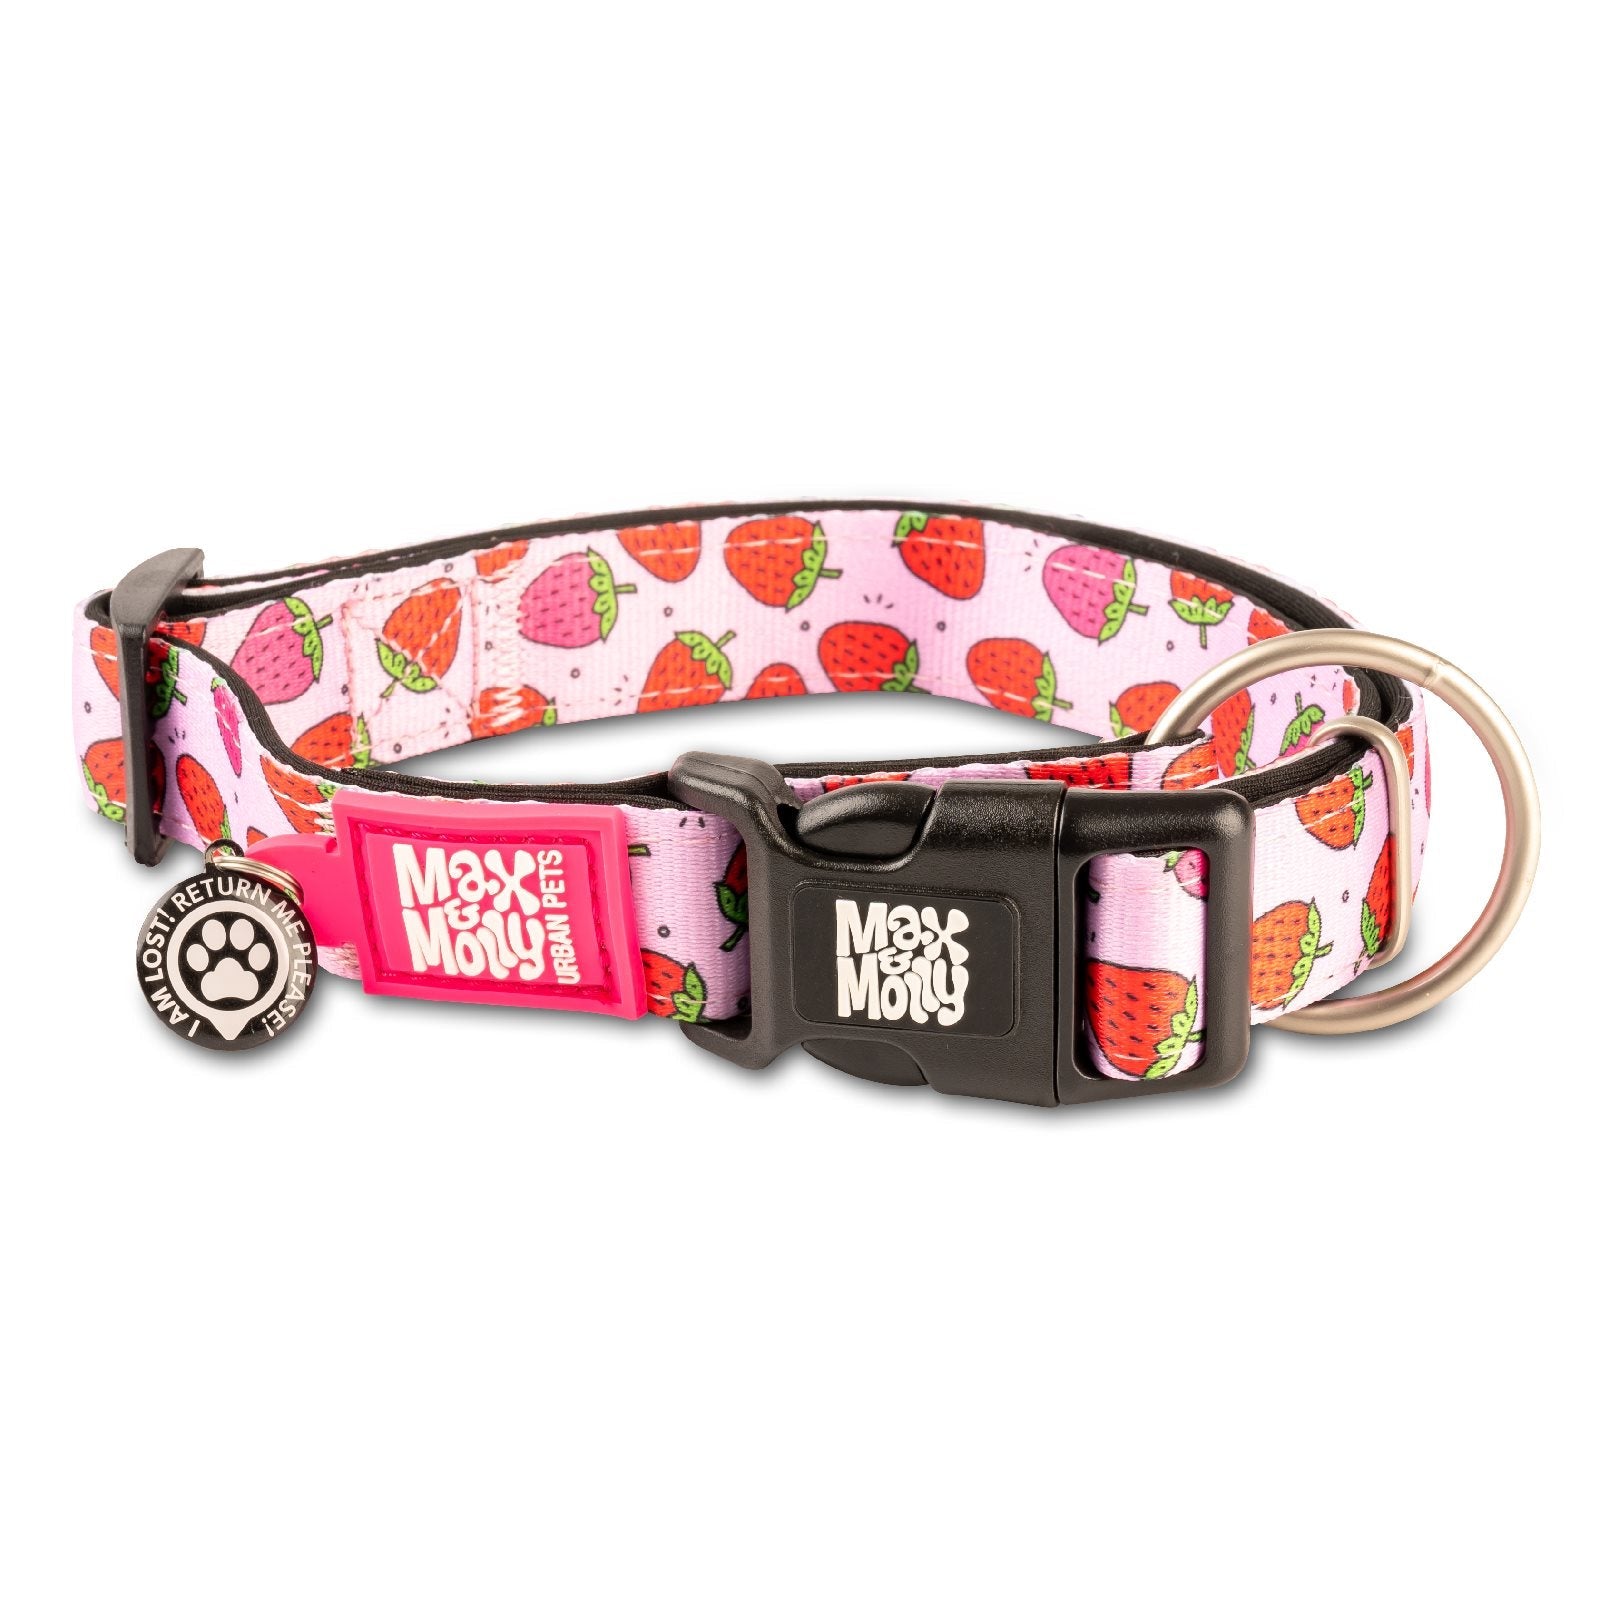 Max & Molly Smart ID Dog Collar - Strawberries - Pets and More